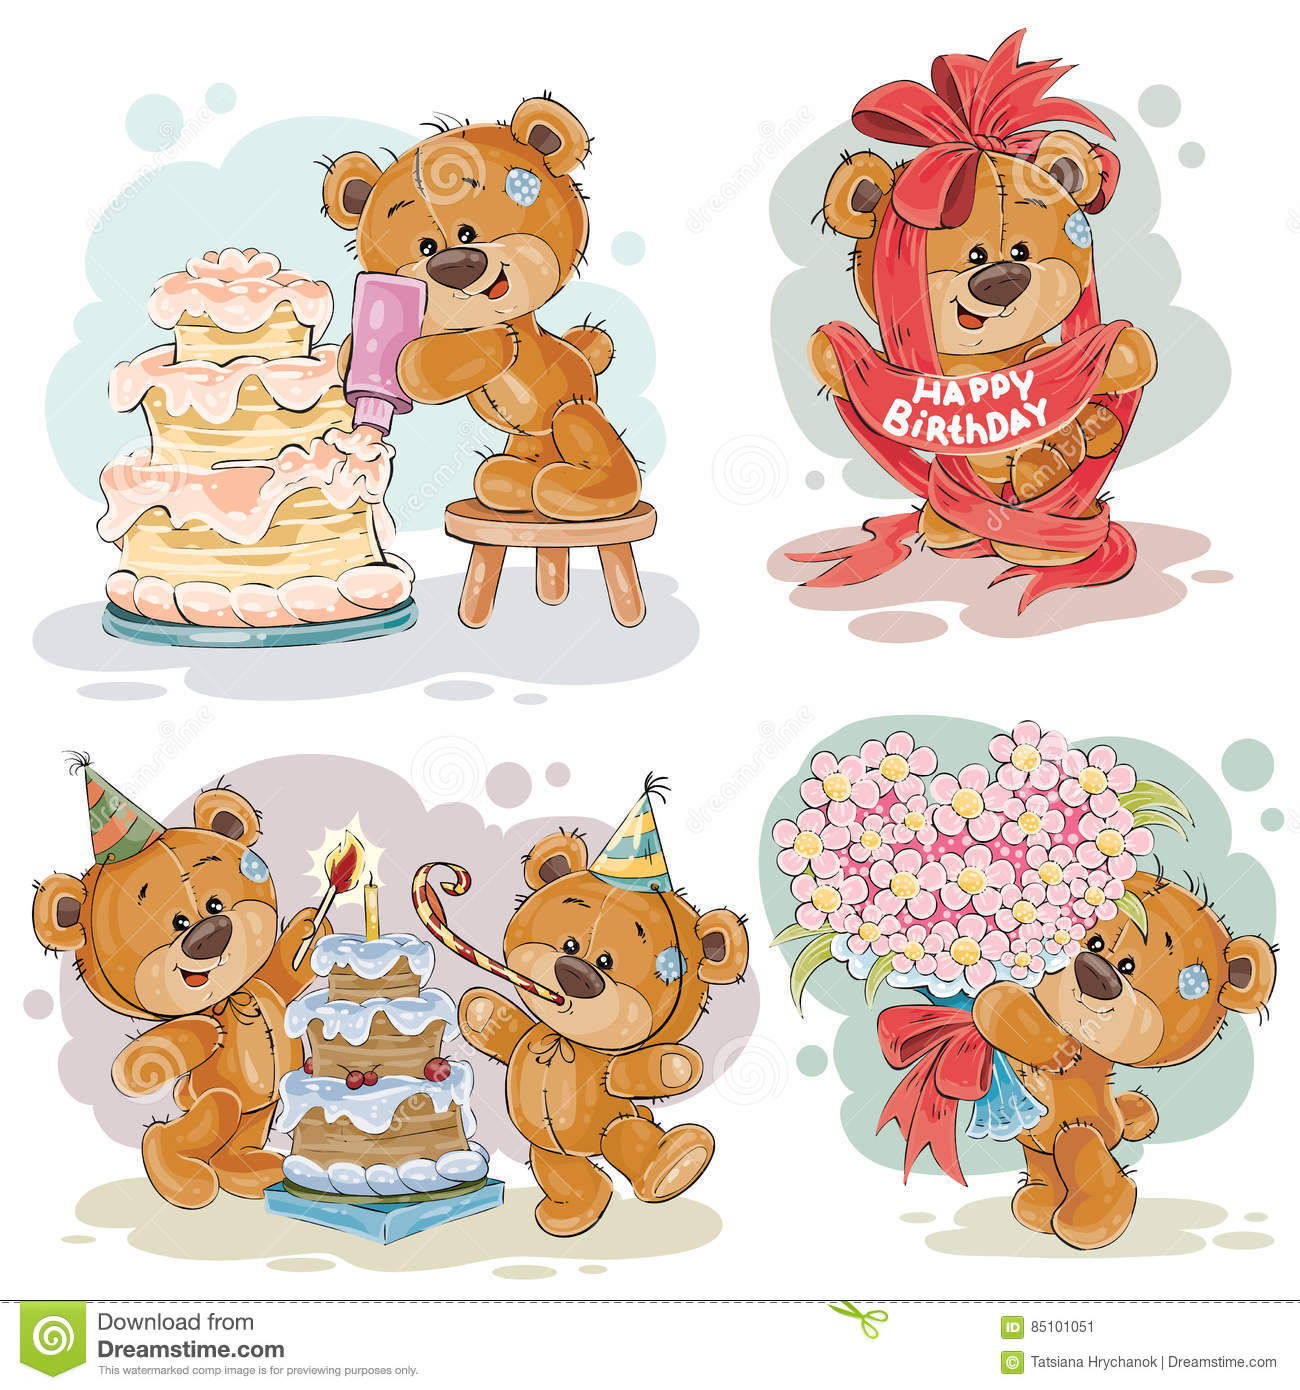 Clip Art Illustrations Of Teddy Bear Wishes You A Happy Birthday.